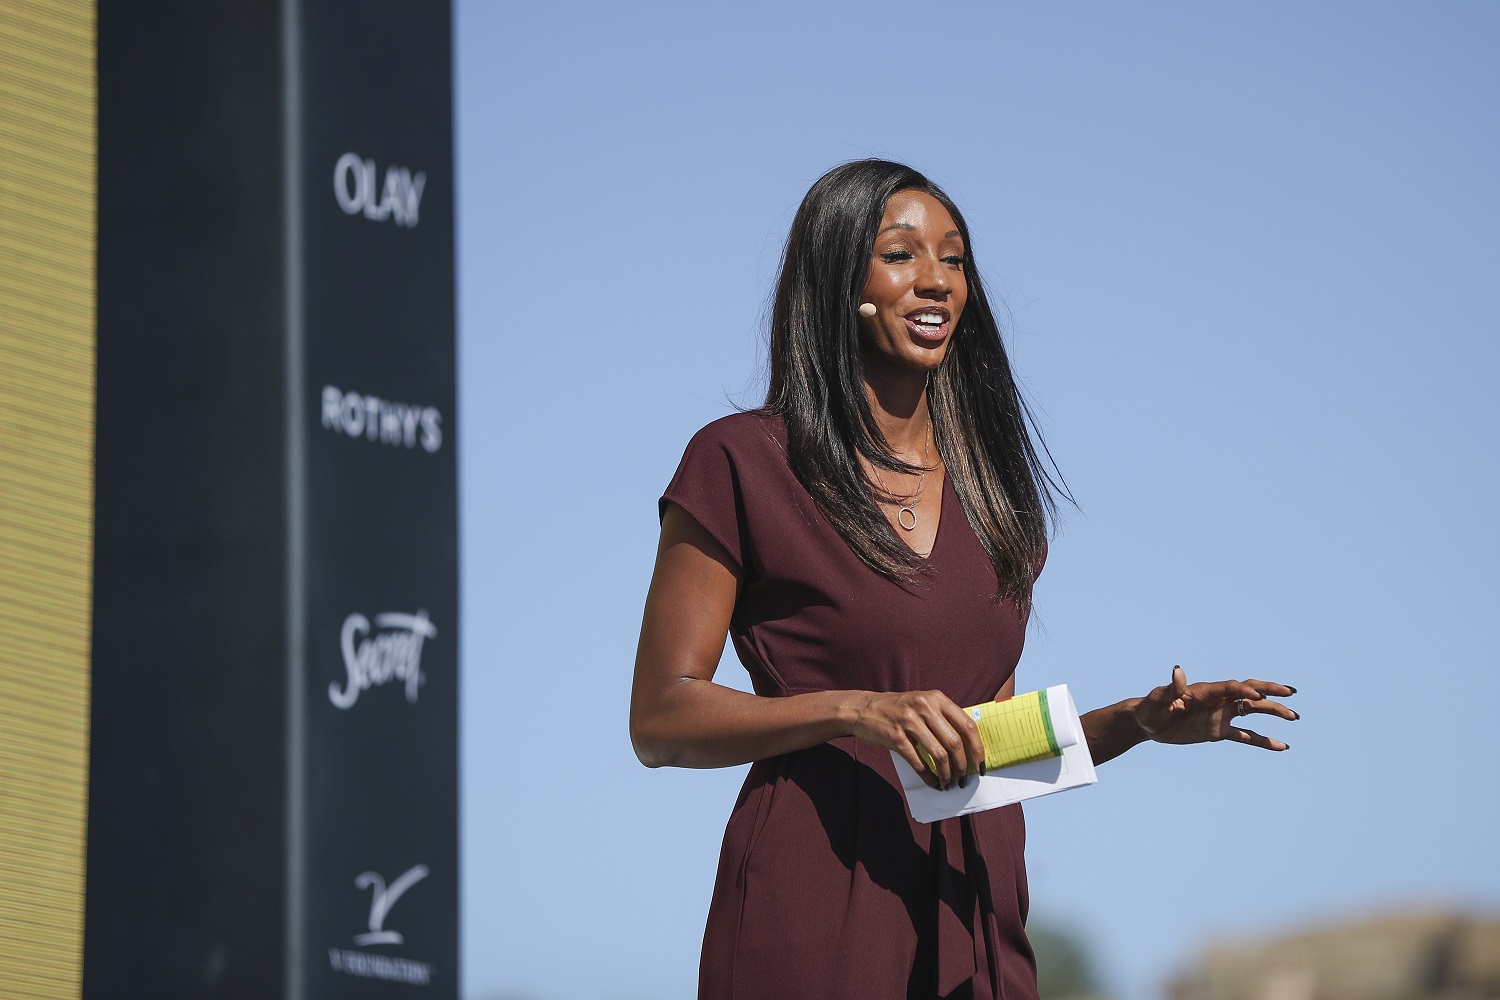 ESPN sideline reporter and host Maria Taylor says she loves the chicken wings at a well-known Atlanta strip club.